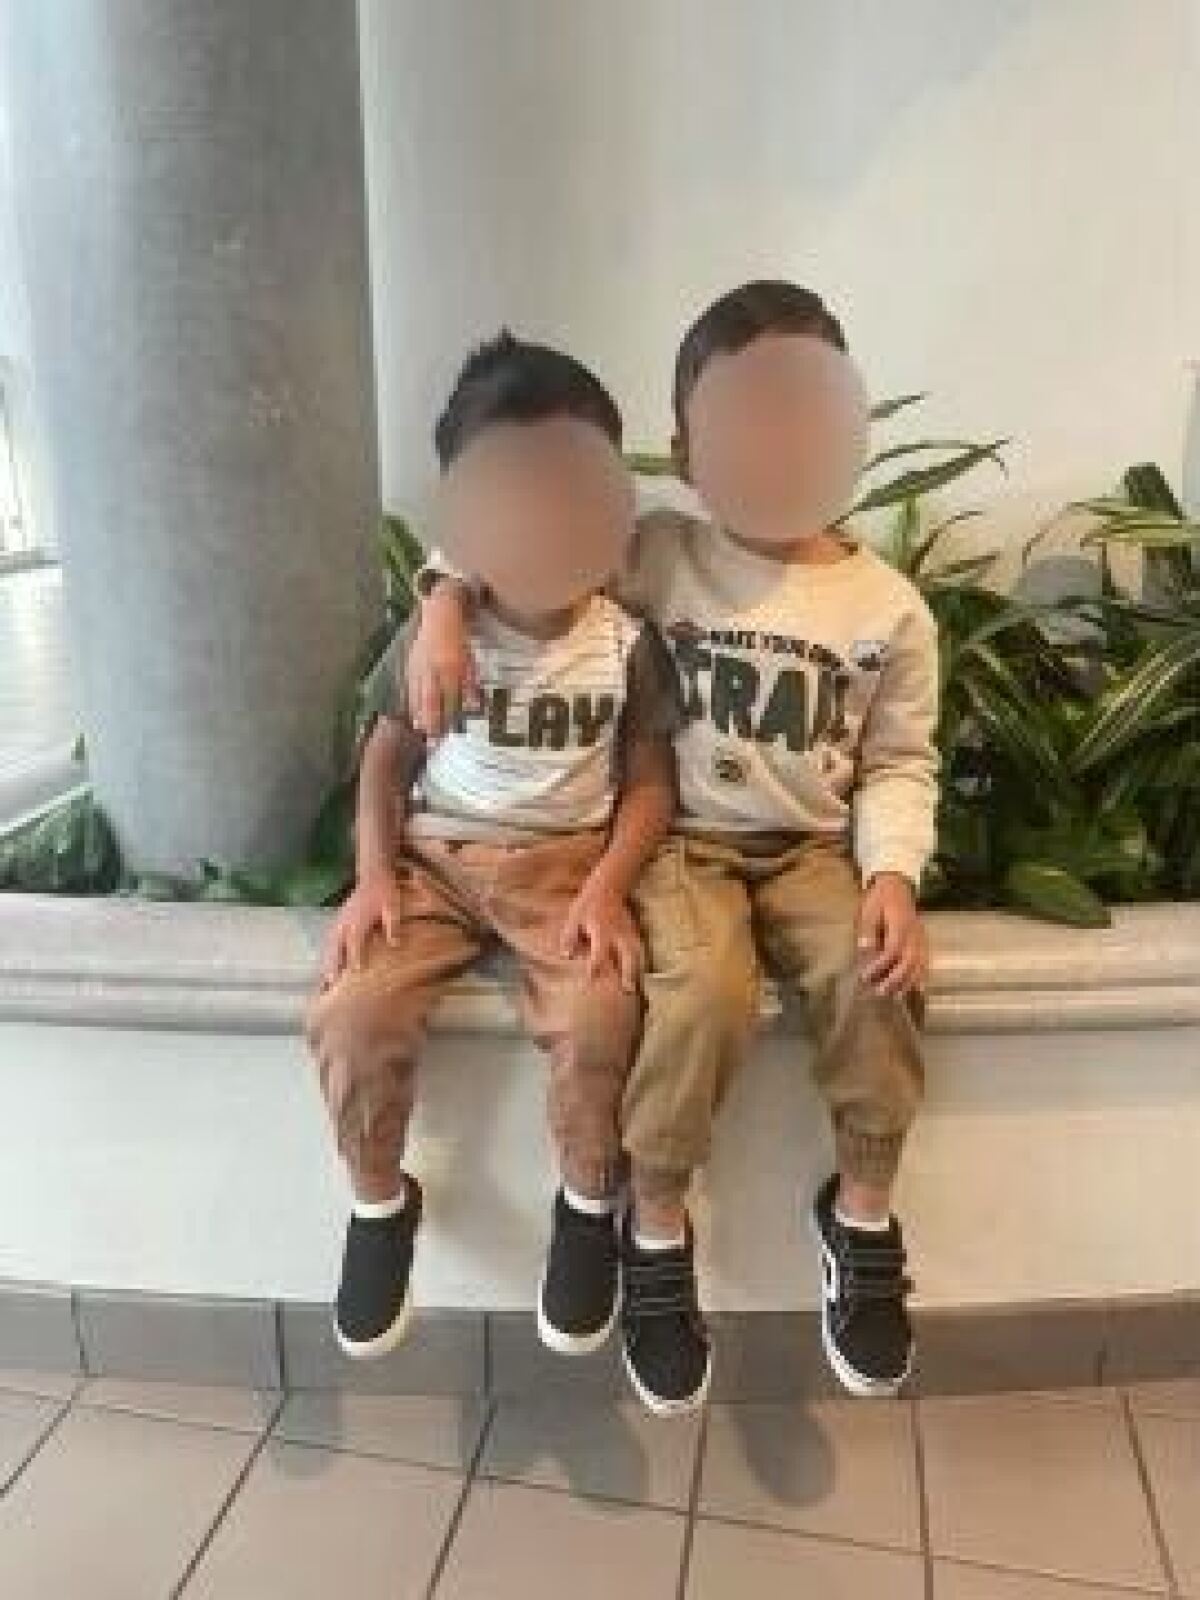 Two young boys in similar outfits